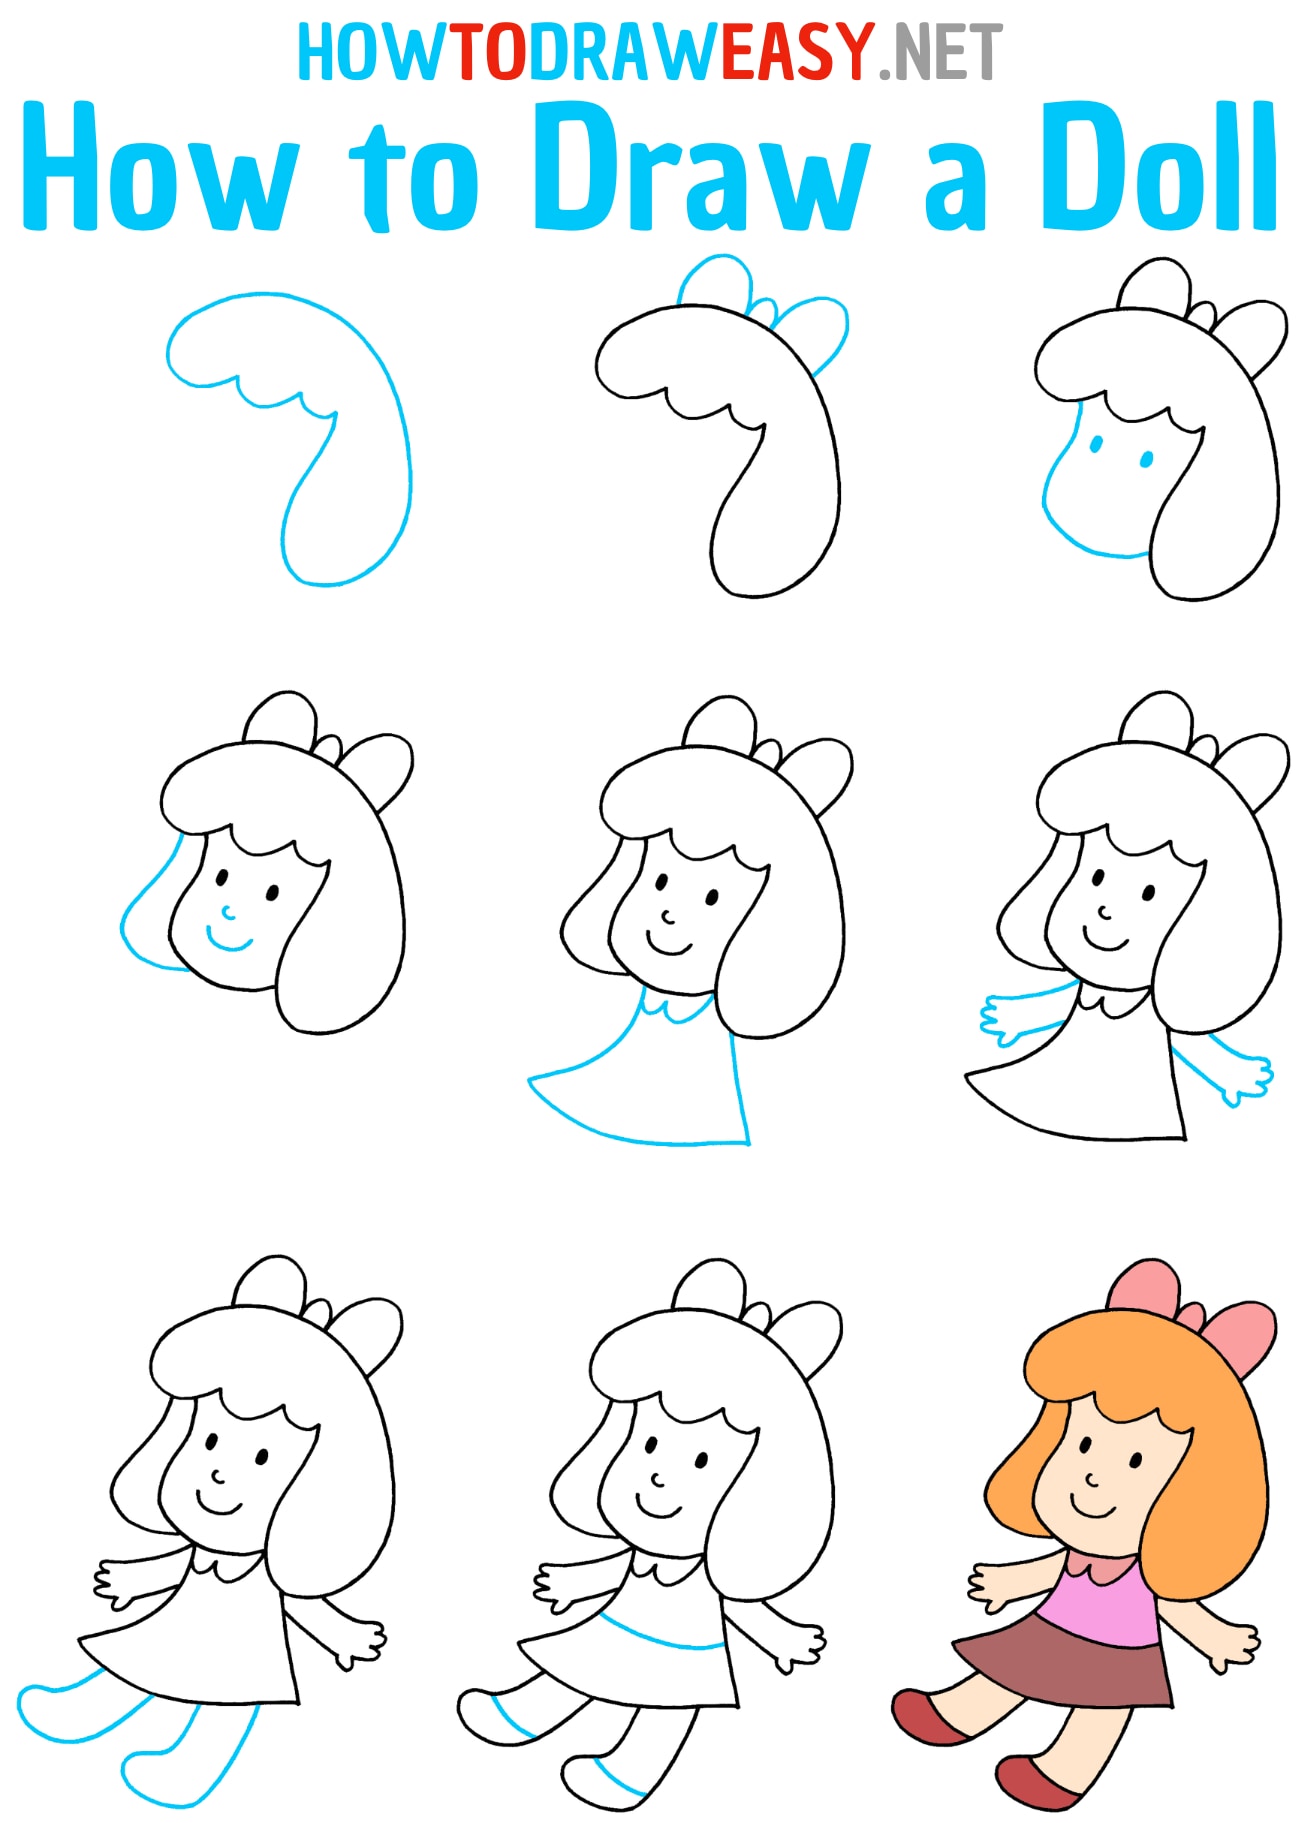 How to Draw a Doll Step by Step